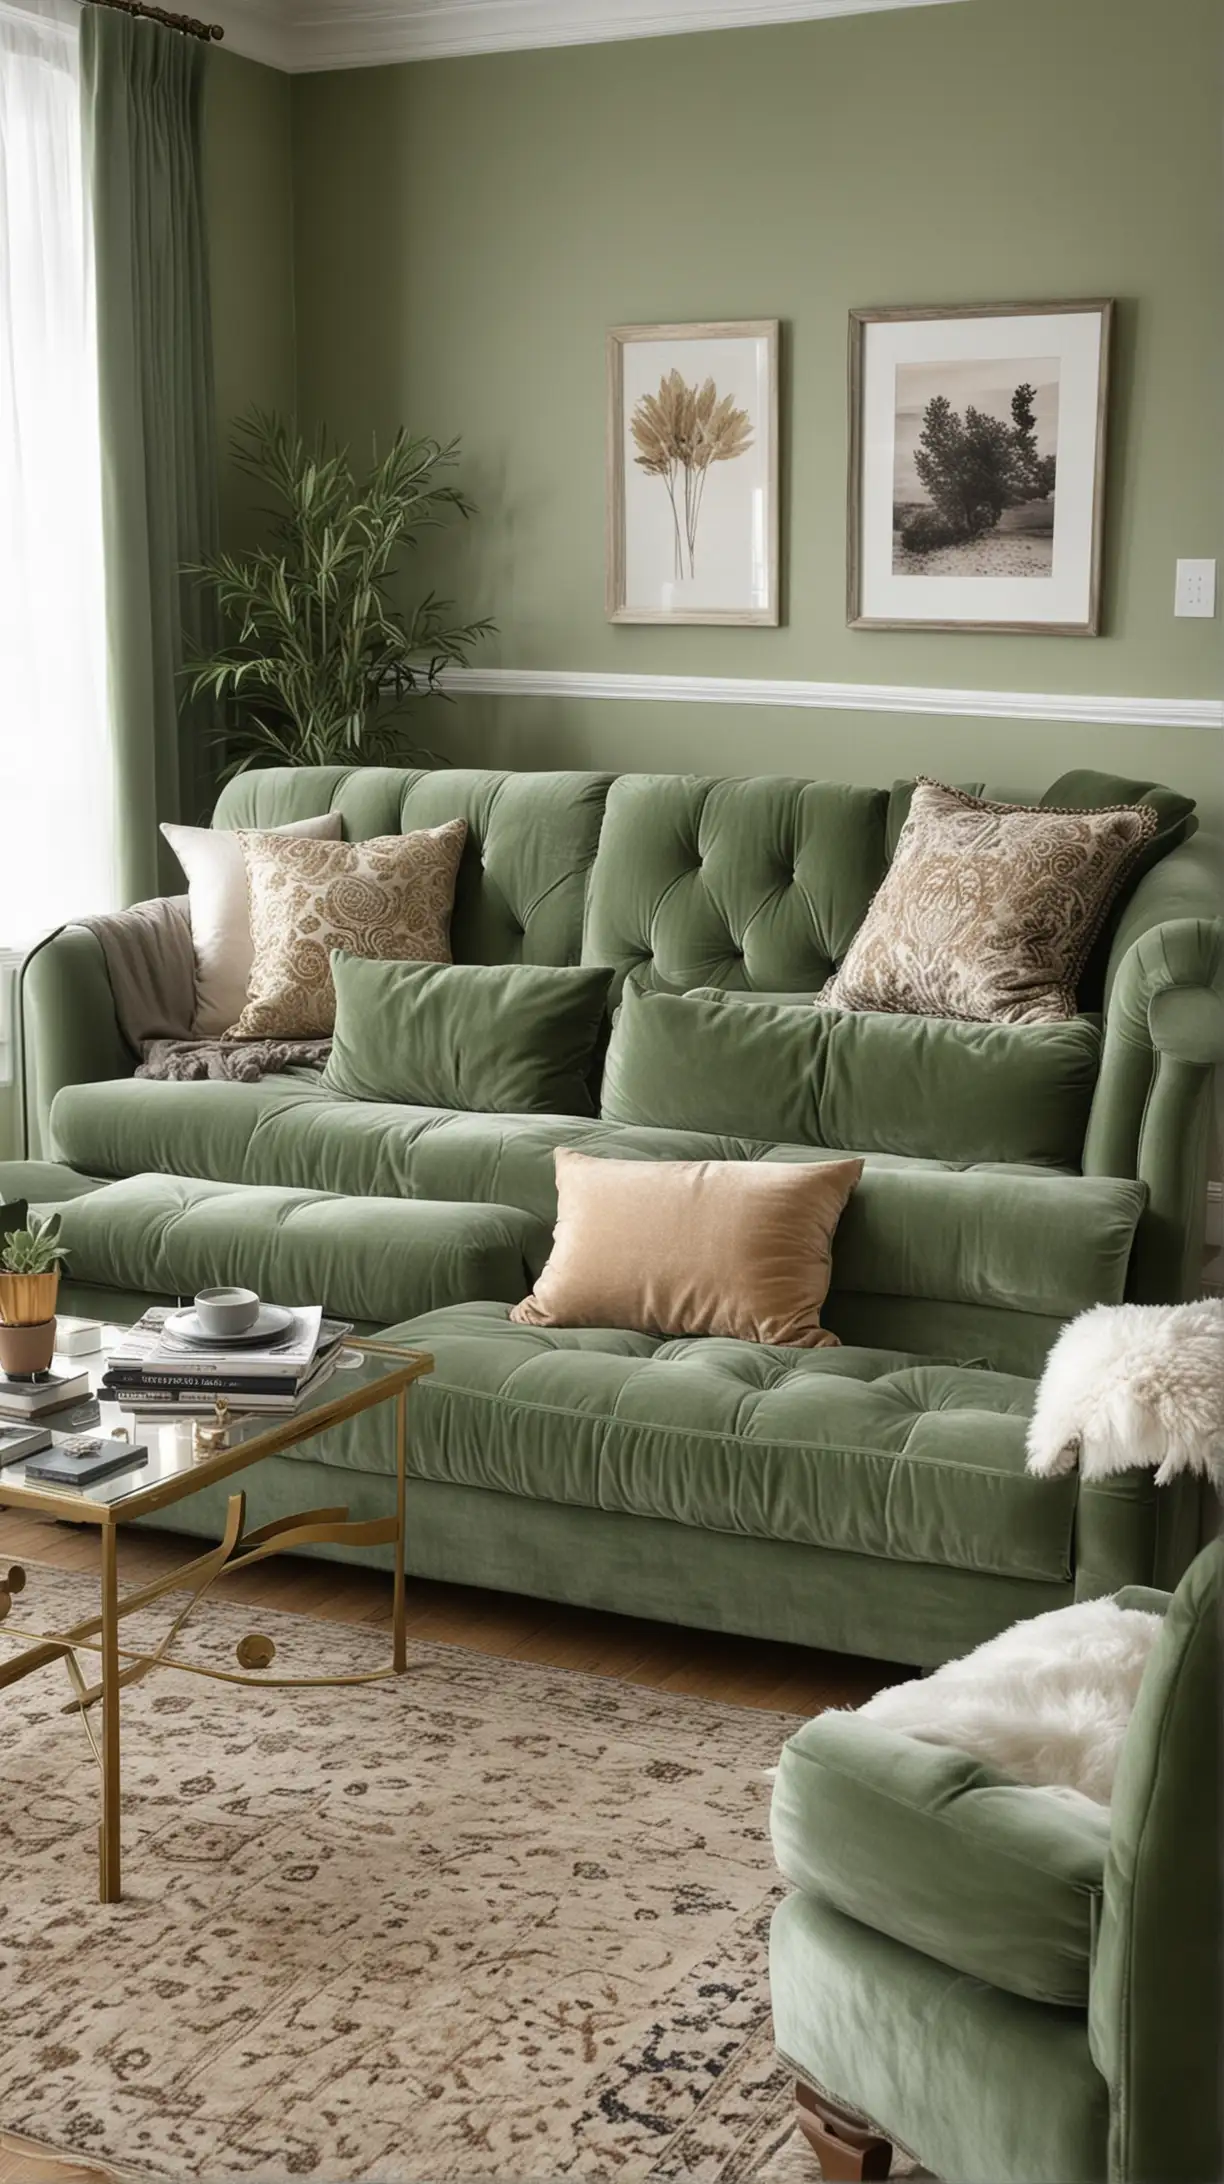 Create picture for Sage Green Living Room and make sure it should be attractive and realistic. Make sure that every single object in the picture should be clear means full overview of the idea not a single object. Here's the idea to create the picture [Velvet Sage Sofa

I chose a sage green velvet sofa for its luxurious feel. It’s incredibly comfortable and stylish, instantly becoming the centerpiece of my living room. It’s a great way to introduce a rich texture and color.]